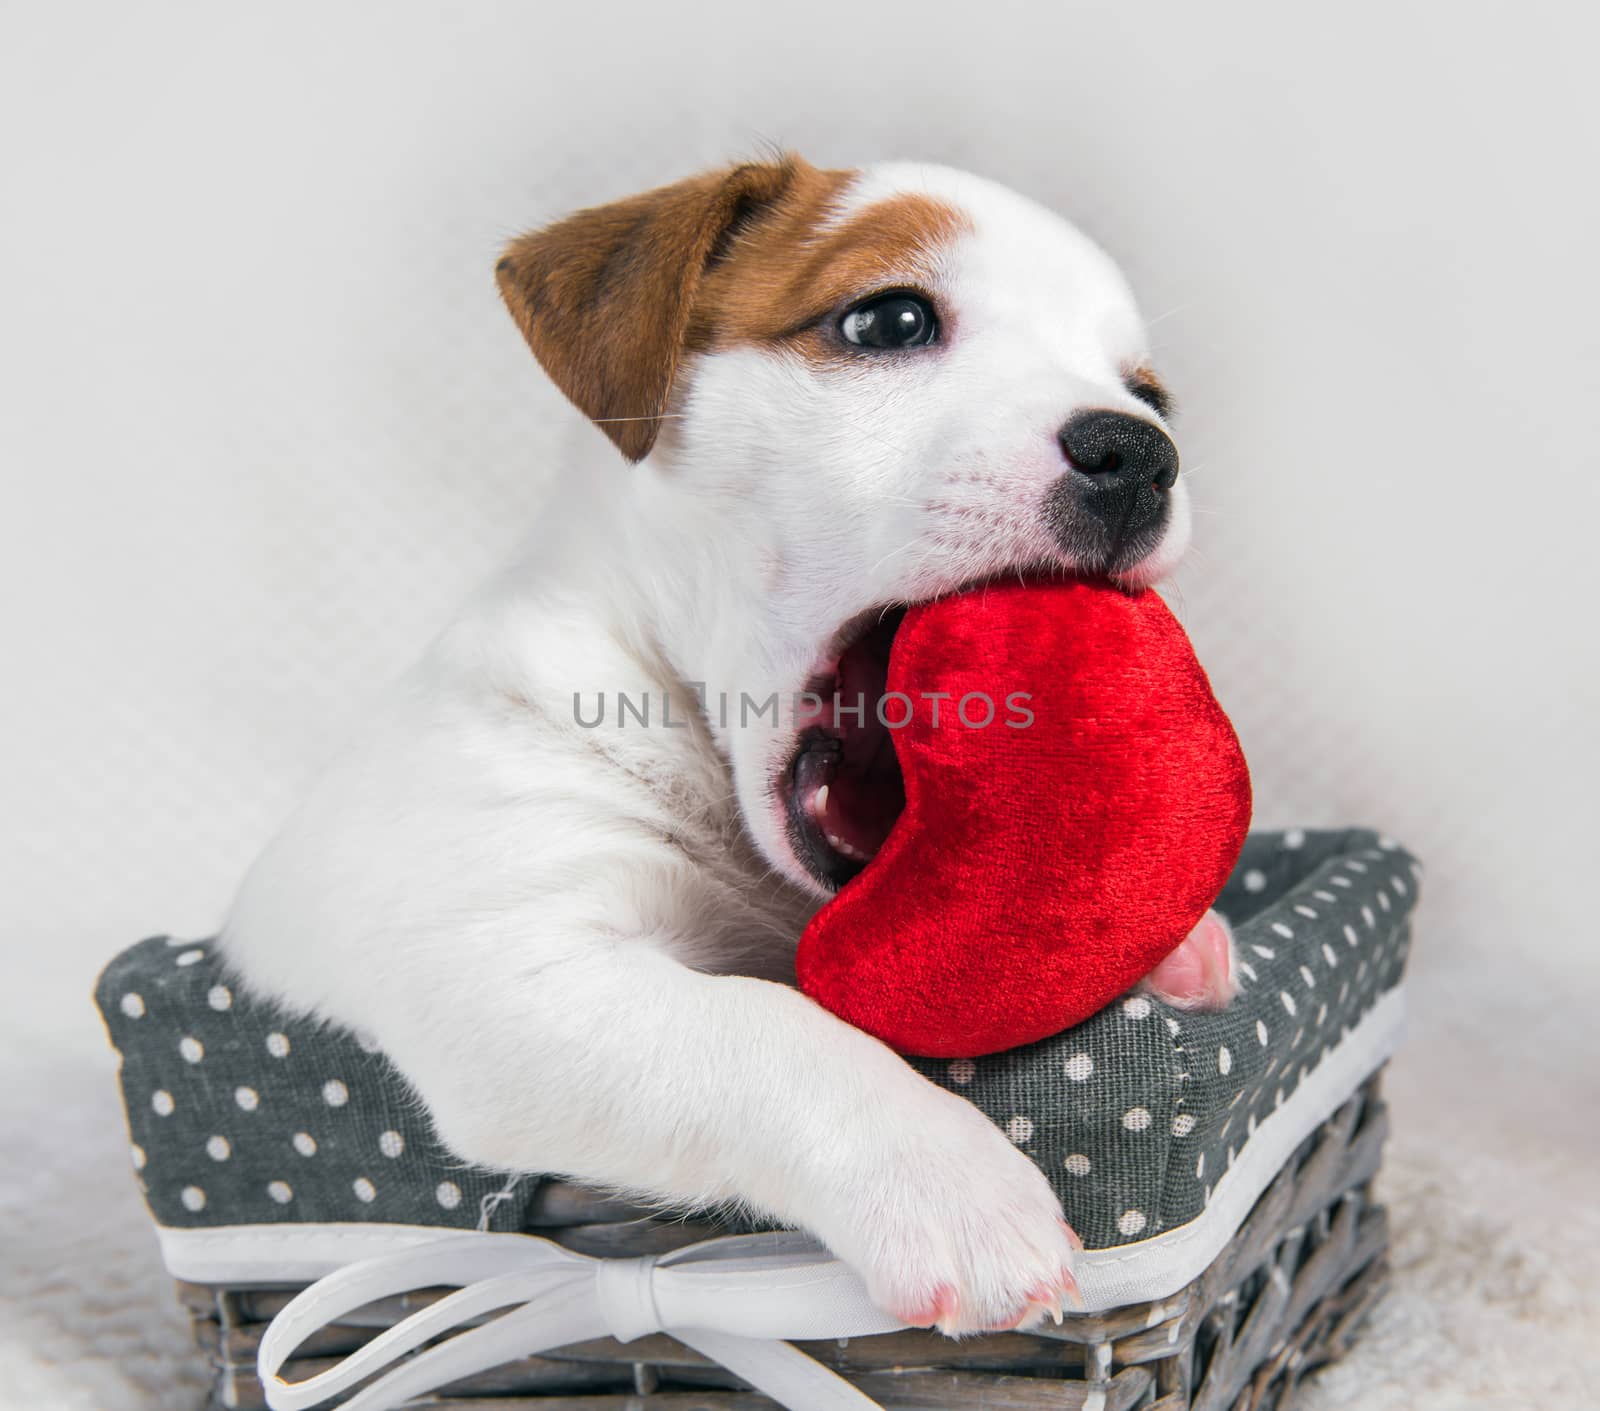 Jack Russell Terrier dog puppy in the basket with red heart on Valentine's Day.